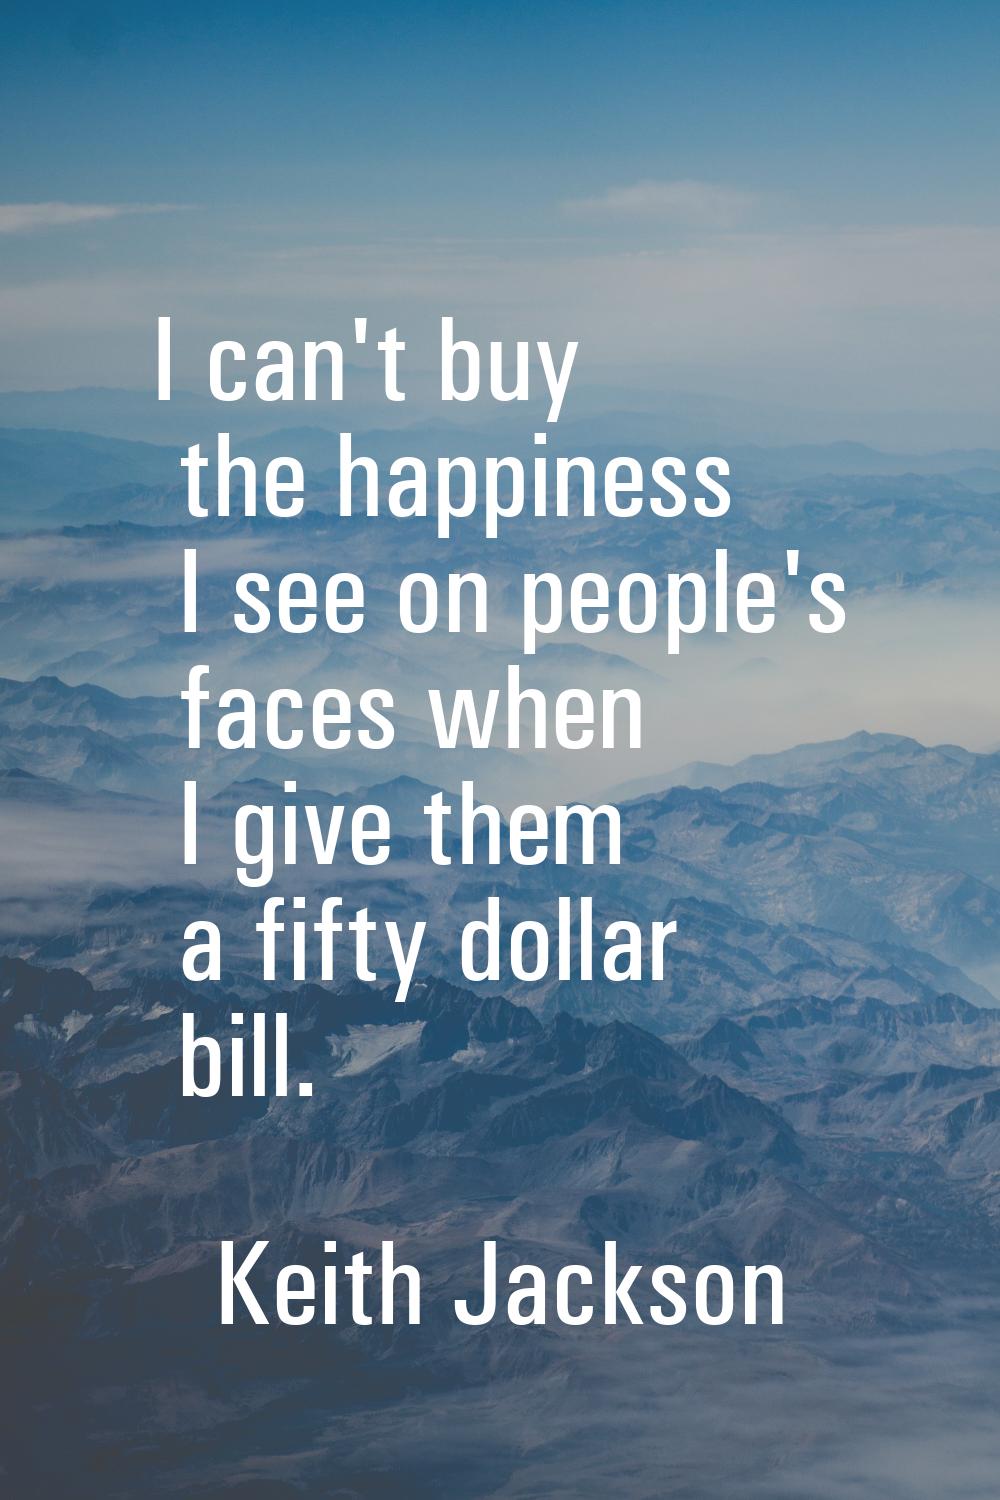 I can't buy the happiness I see on people's faces when I give them a fifty dollar bill.